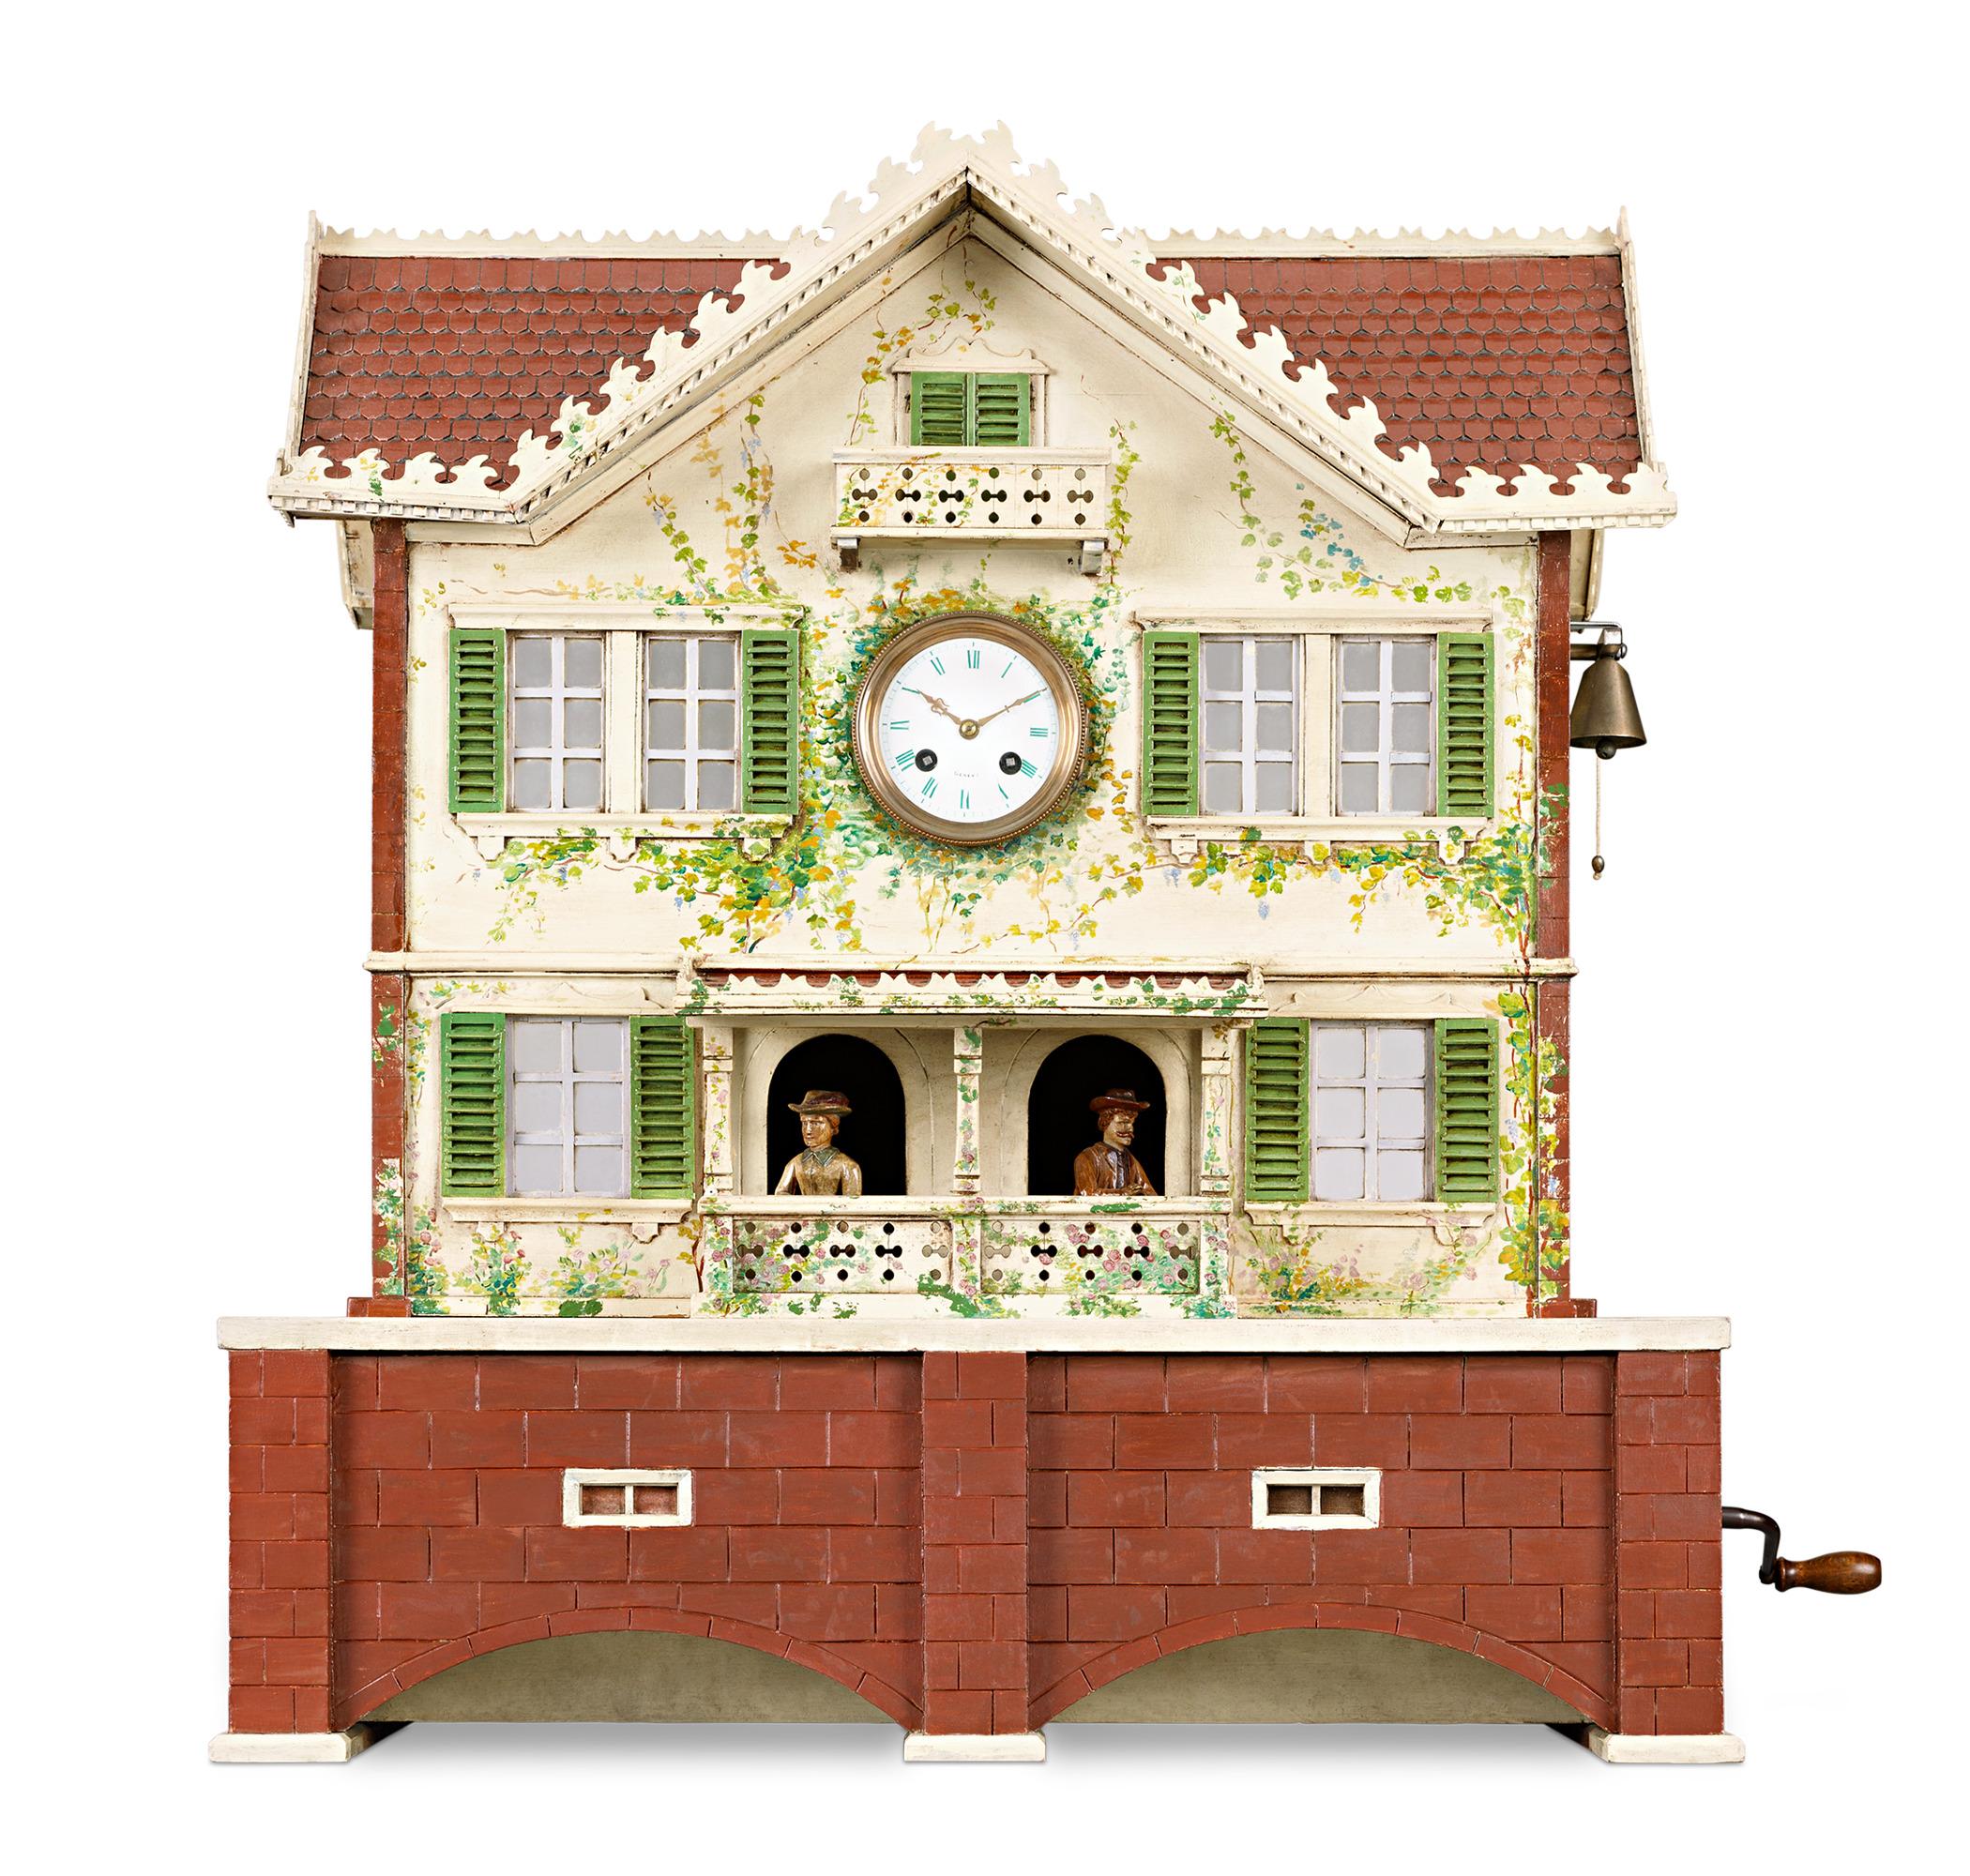 This artful and unique automaton clock and music box house proudly bears the signature of Geneva, a hallmark of unparalleled horological excellence. For generations, Geneva has seamlessly merged traditional craftsmanship with cutting-edge